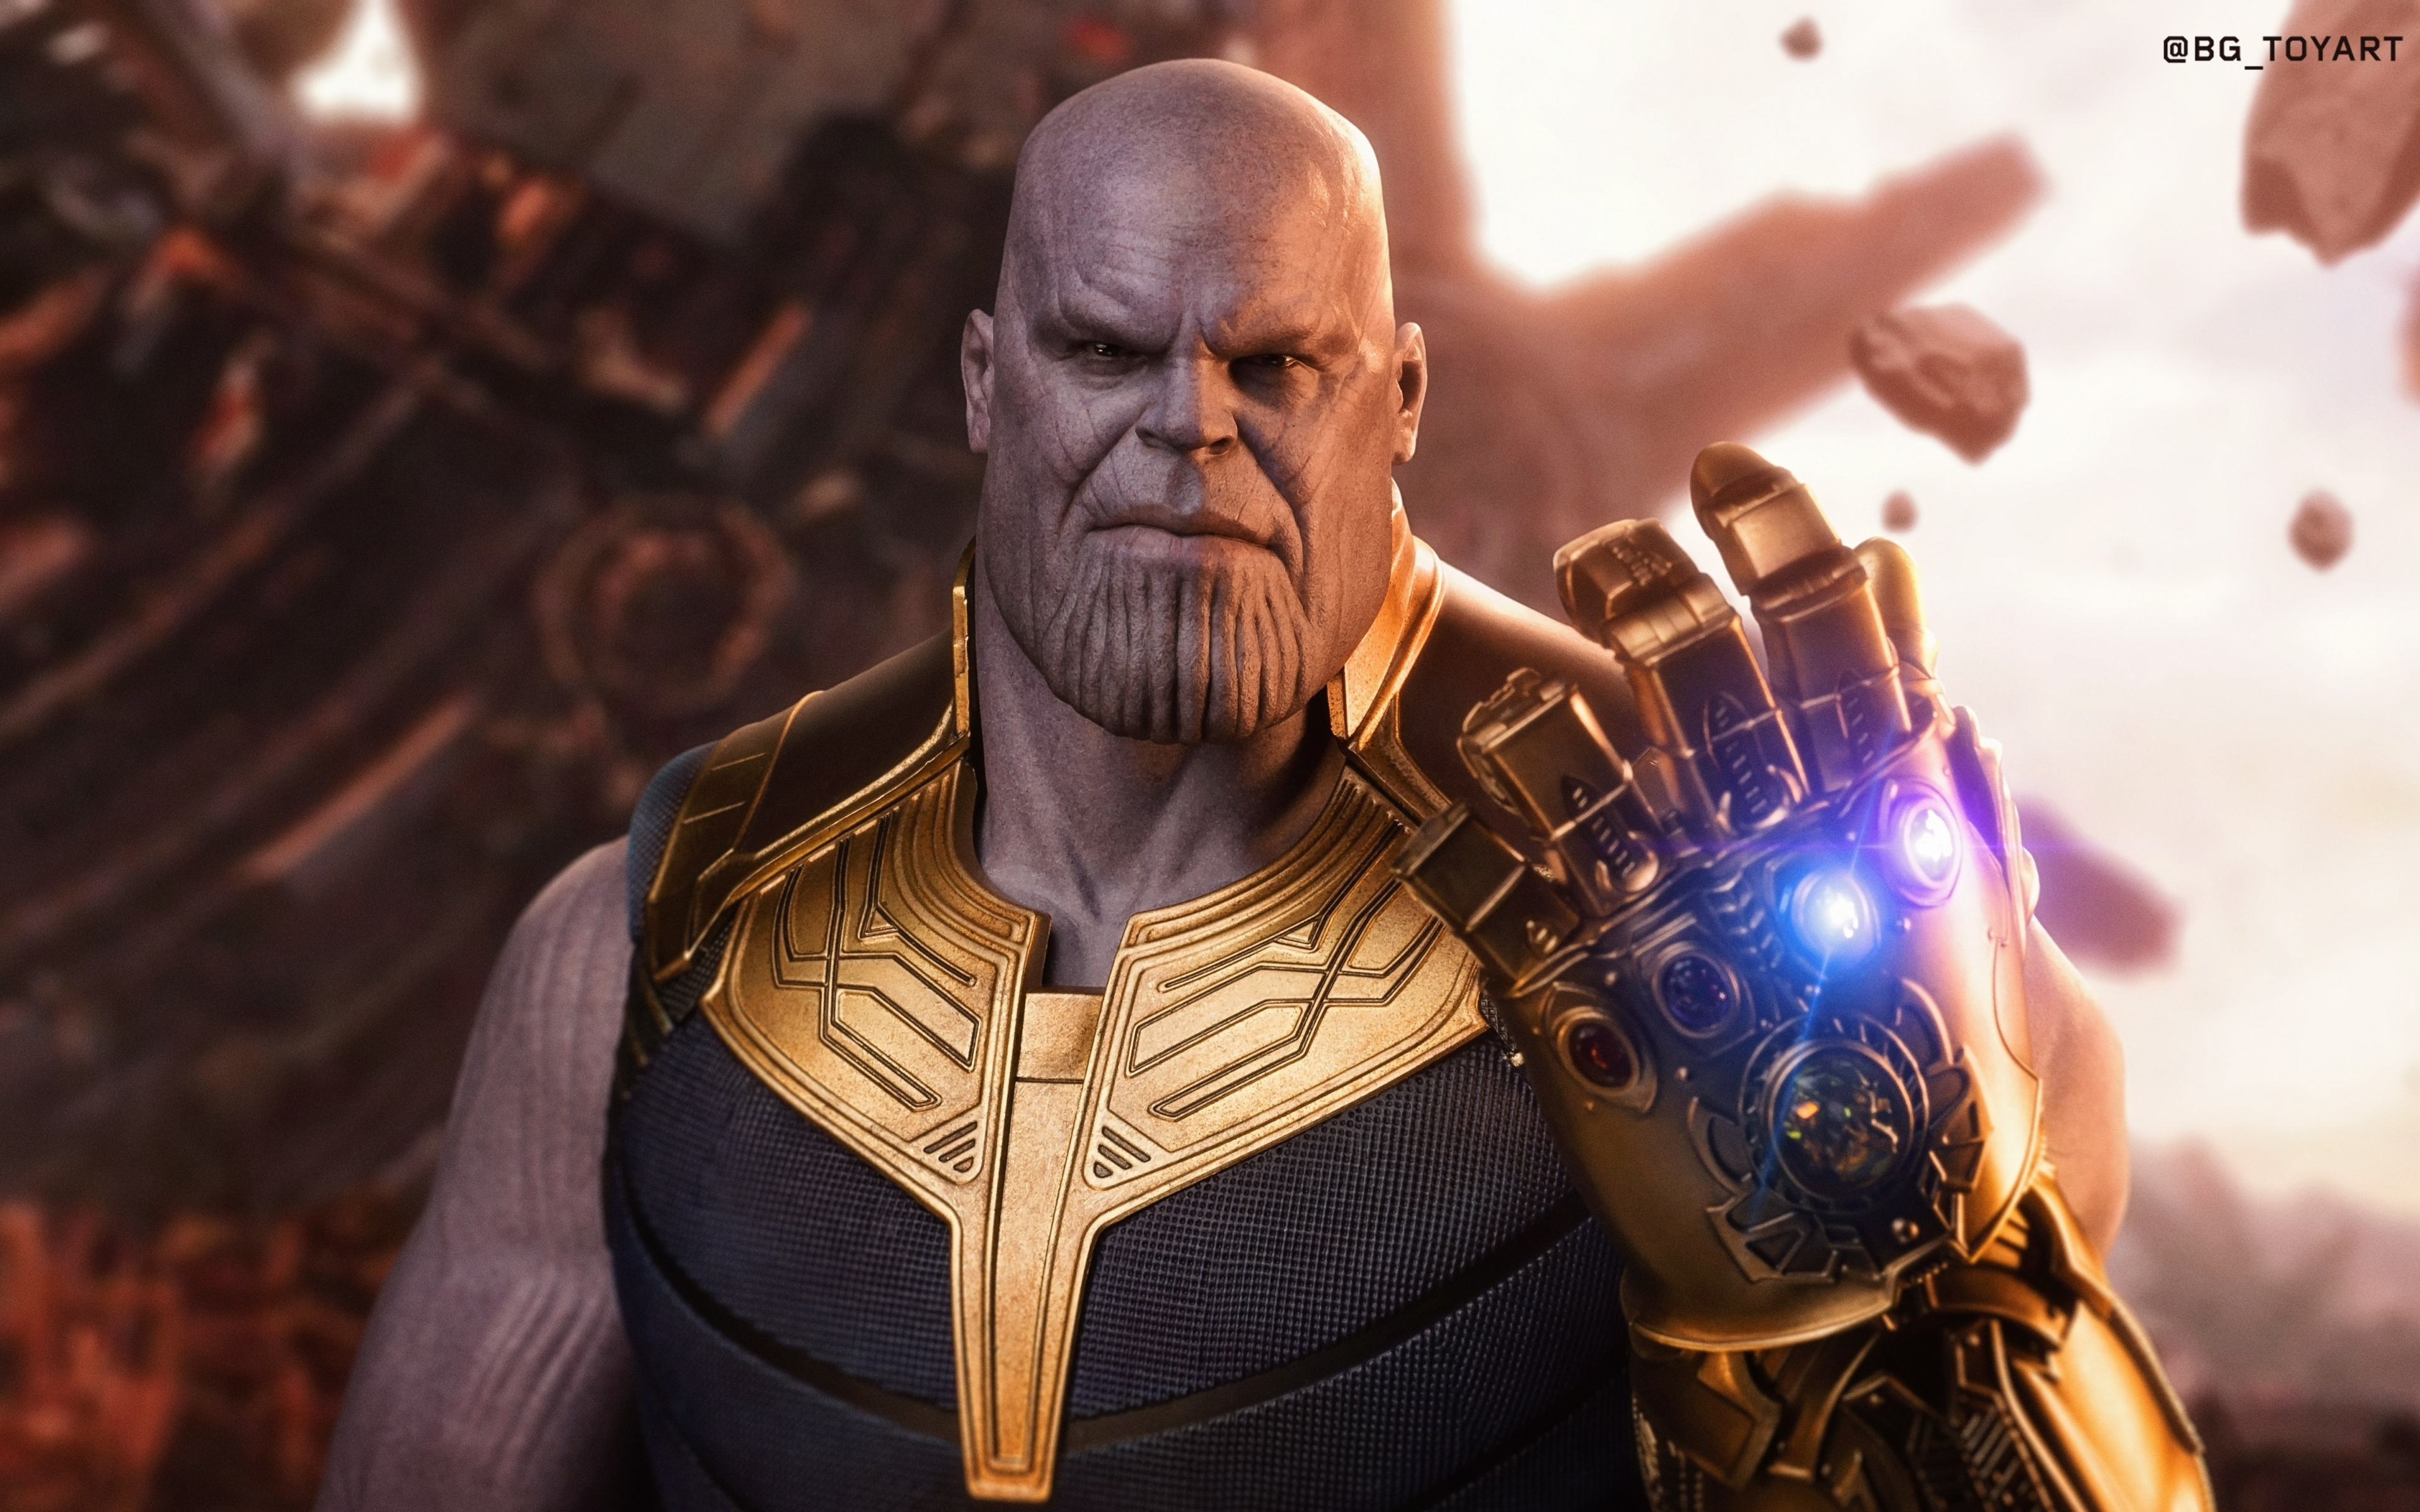 Download 3840x2400 wallpaper  thanos  avengers infinity 